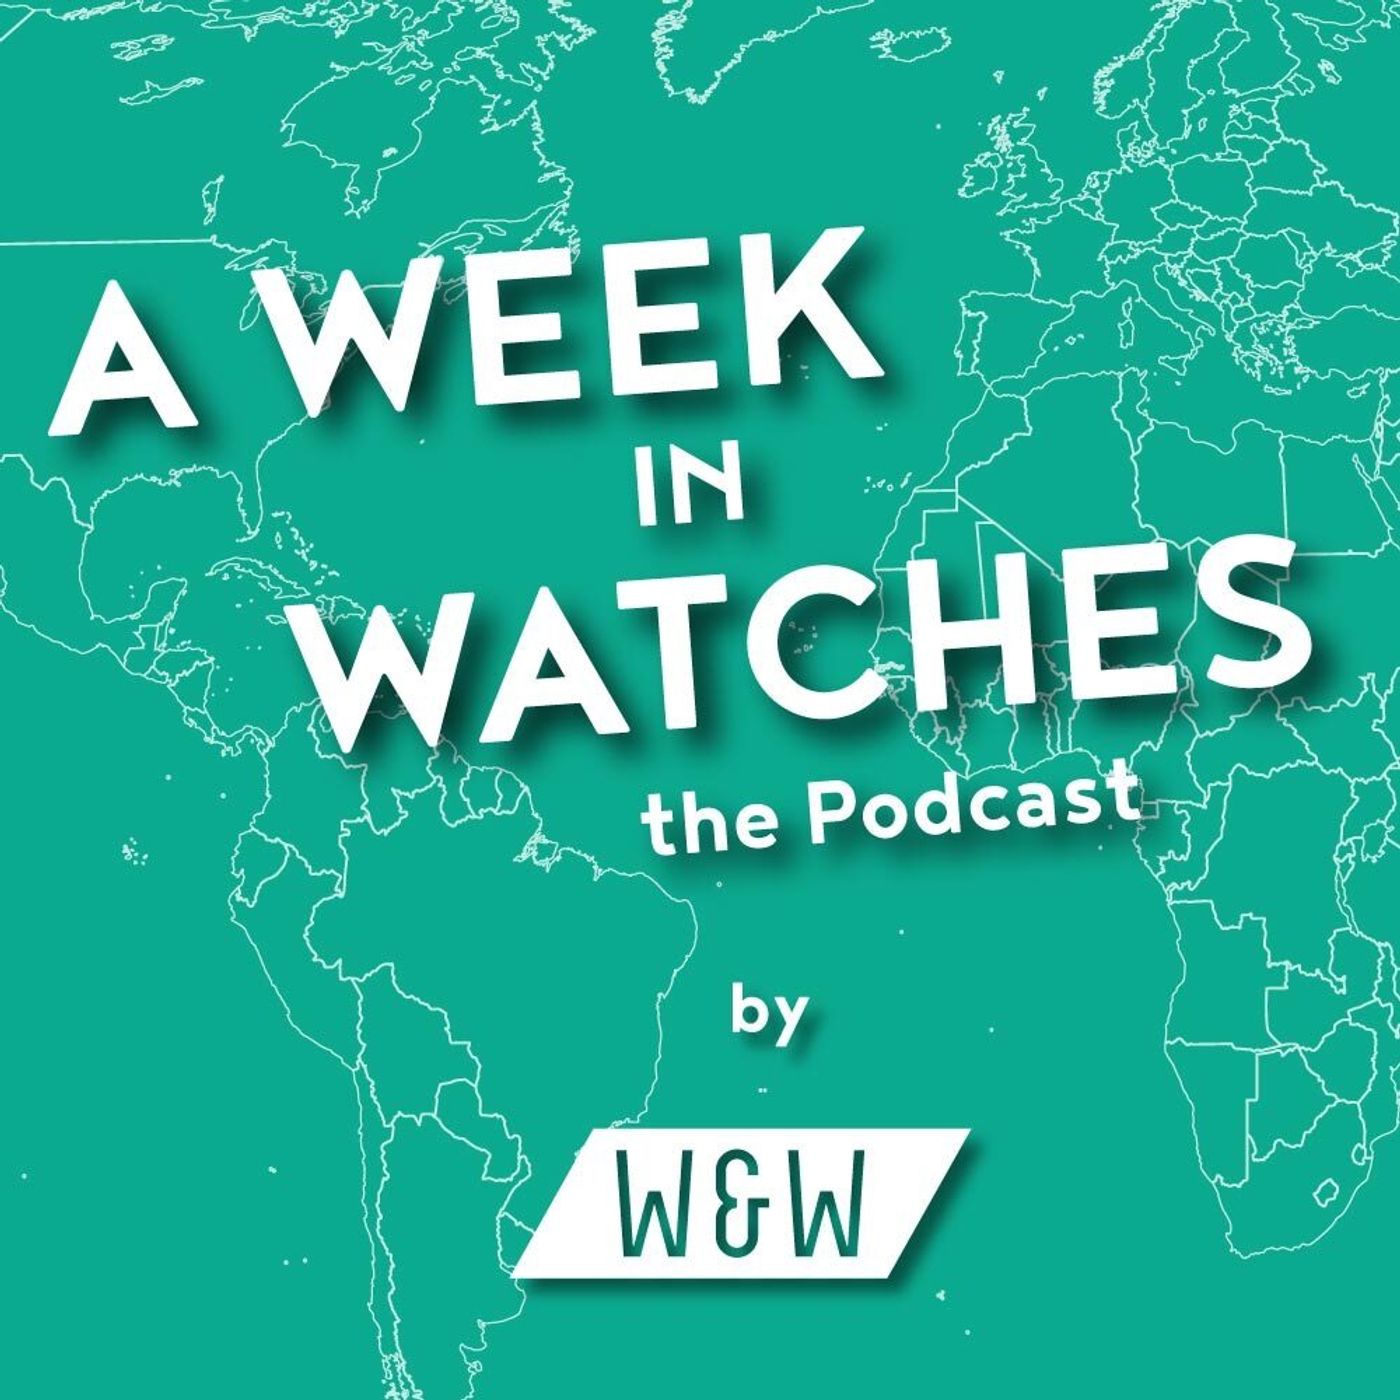 A Week in Watches Ep 26: Breaking News from Rolex, More Chronos from Baltic, & Bond Turning 60